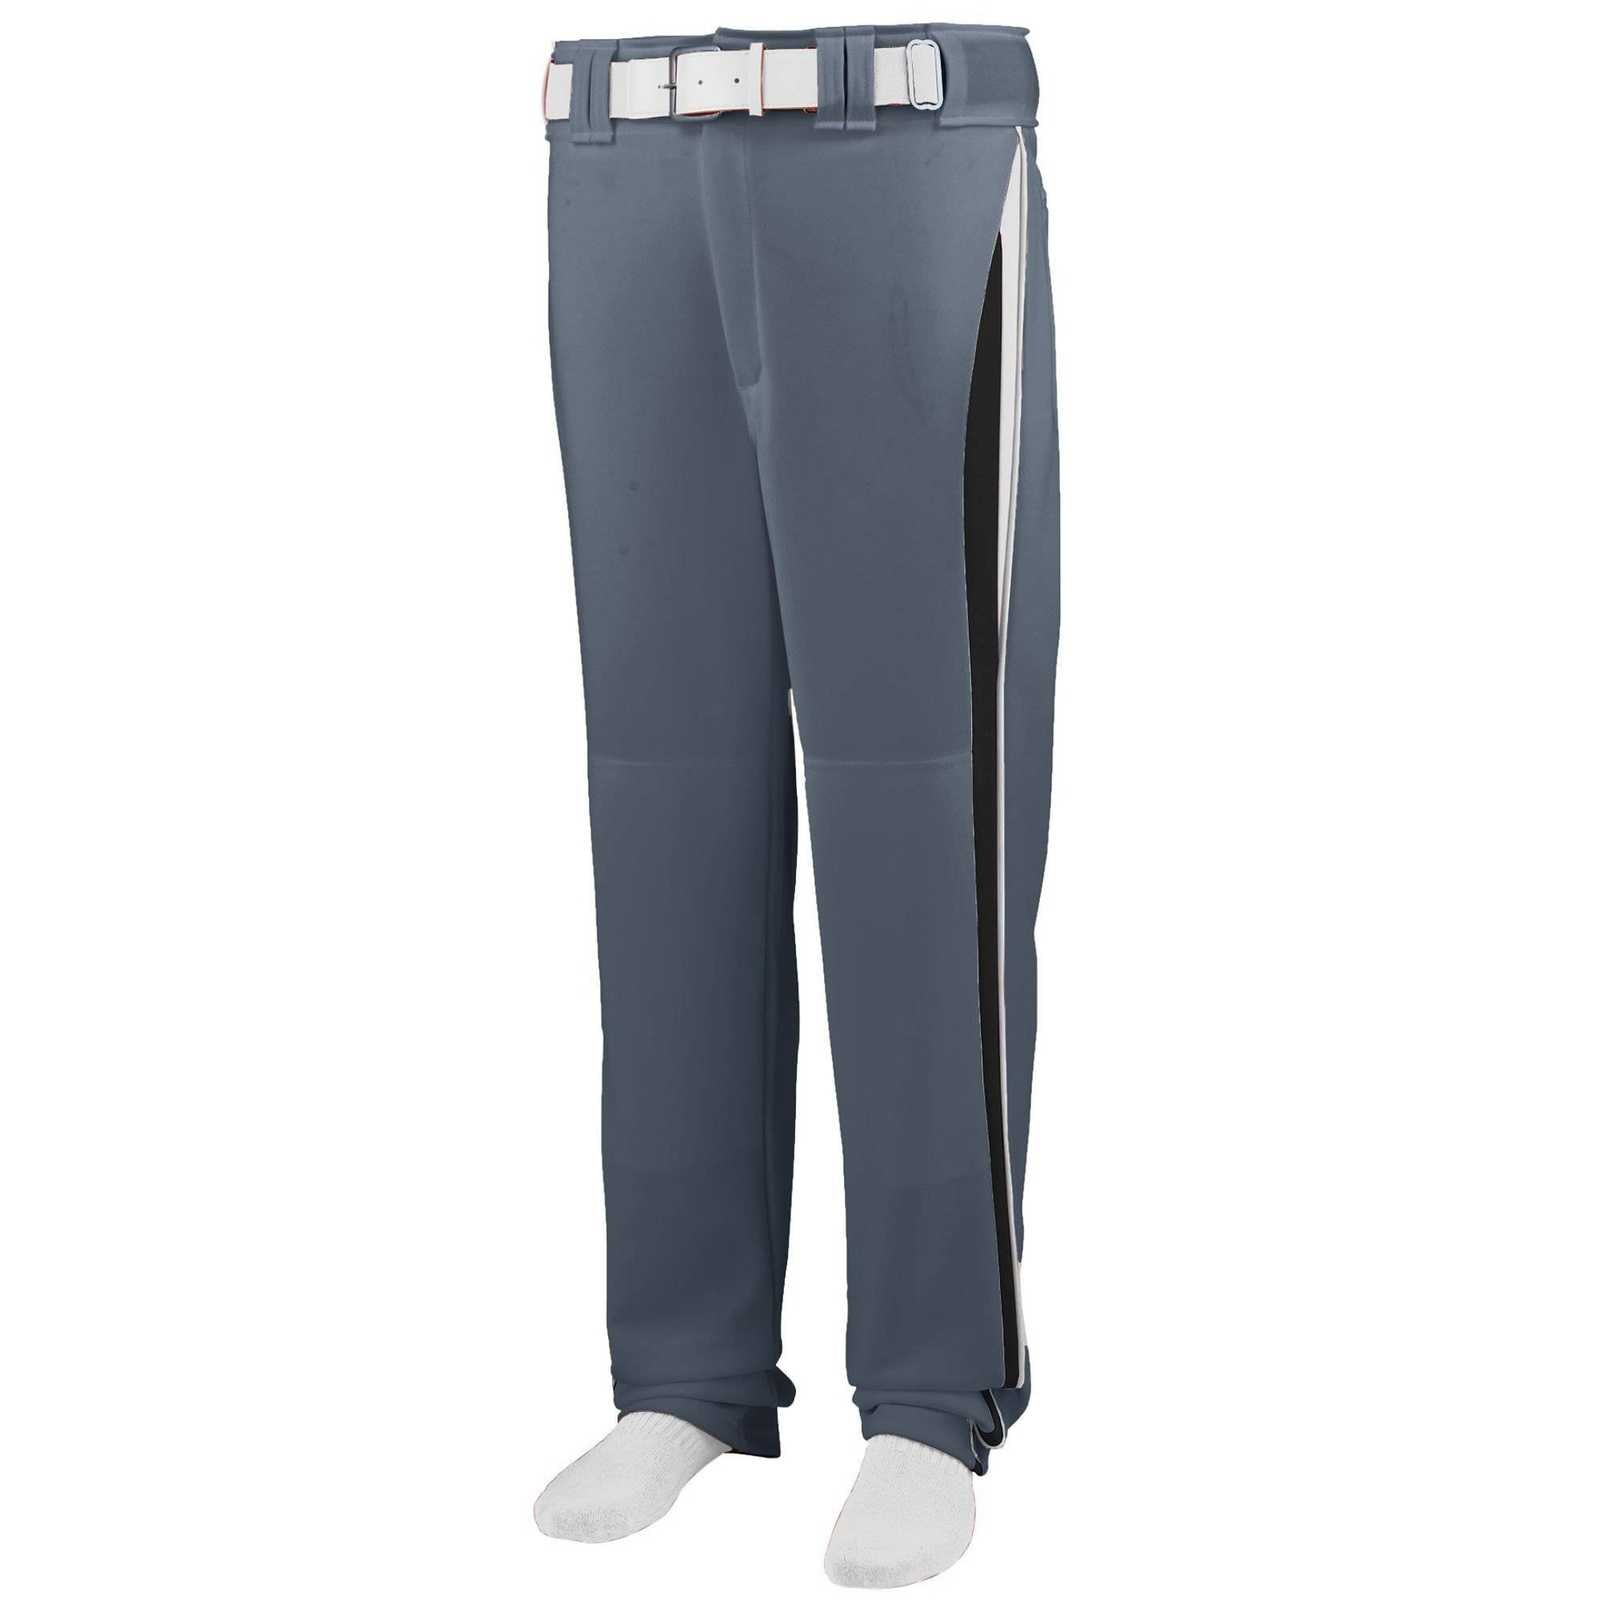 Augusta 1476 Line Drive Baseball Softball Pant Youth - Graphite Bk Wh - HIT a Double - 1